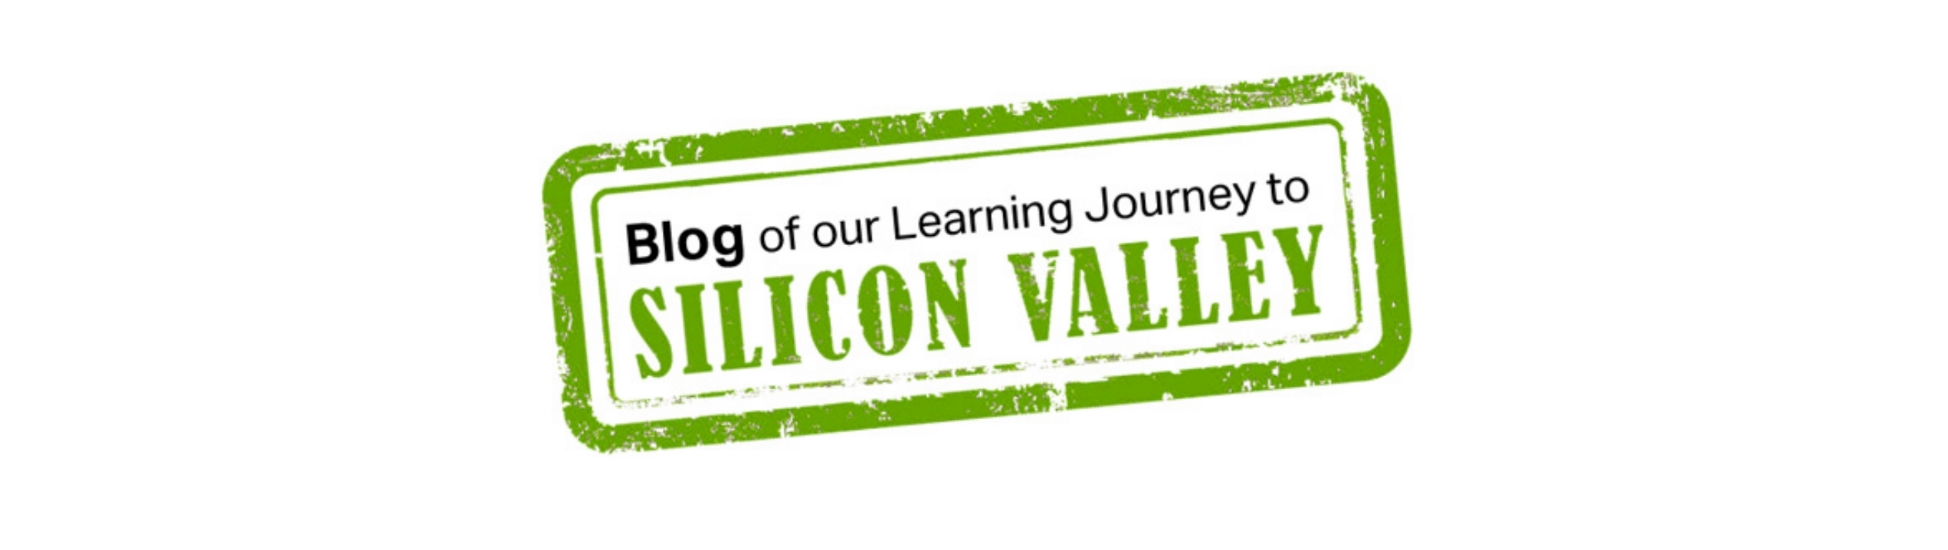 insight_blog_of_silicon_valley_header